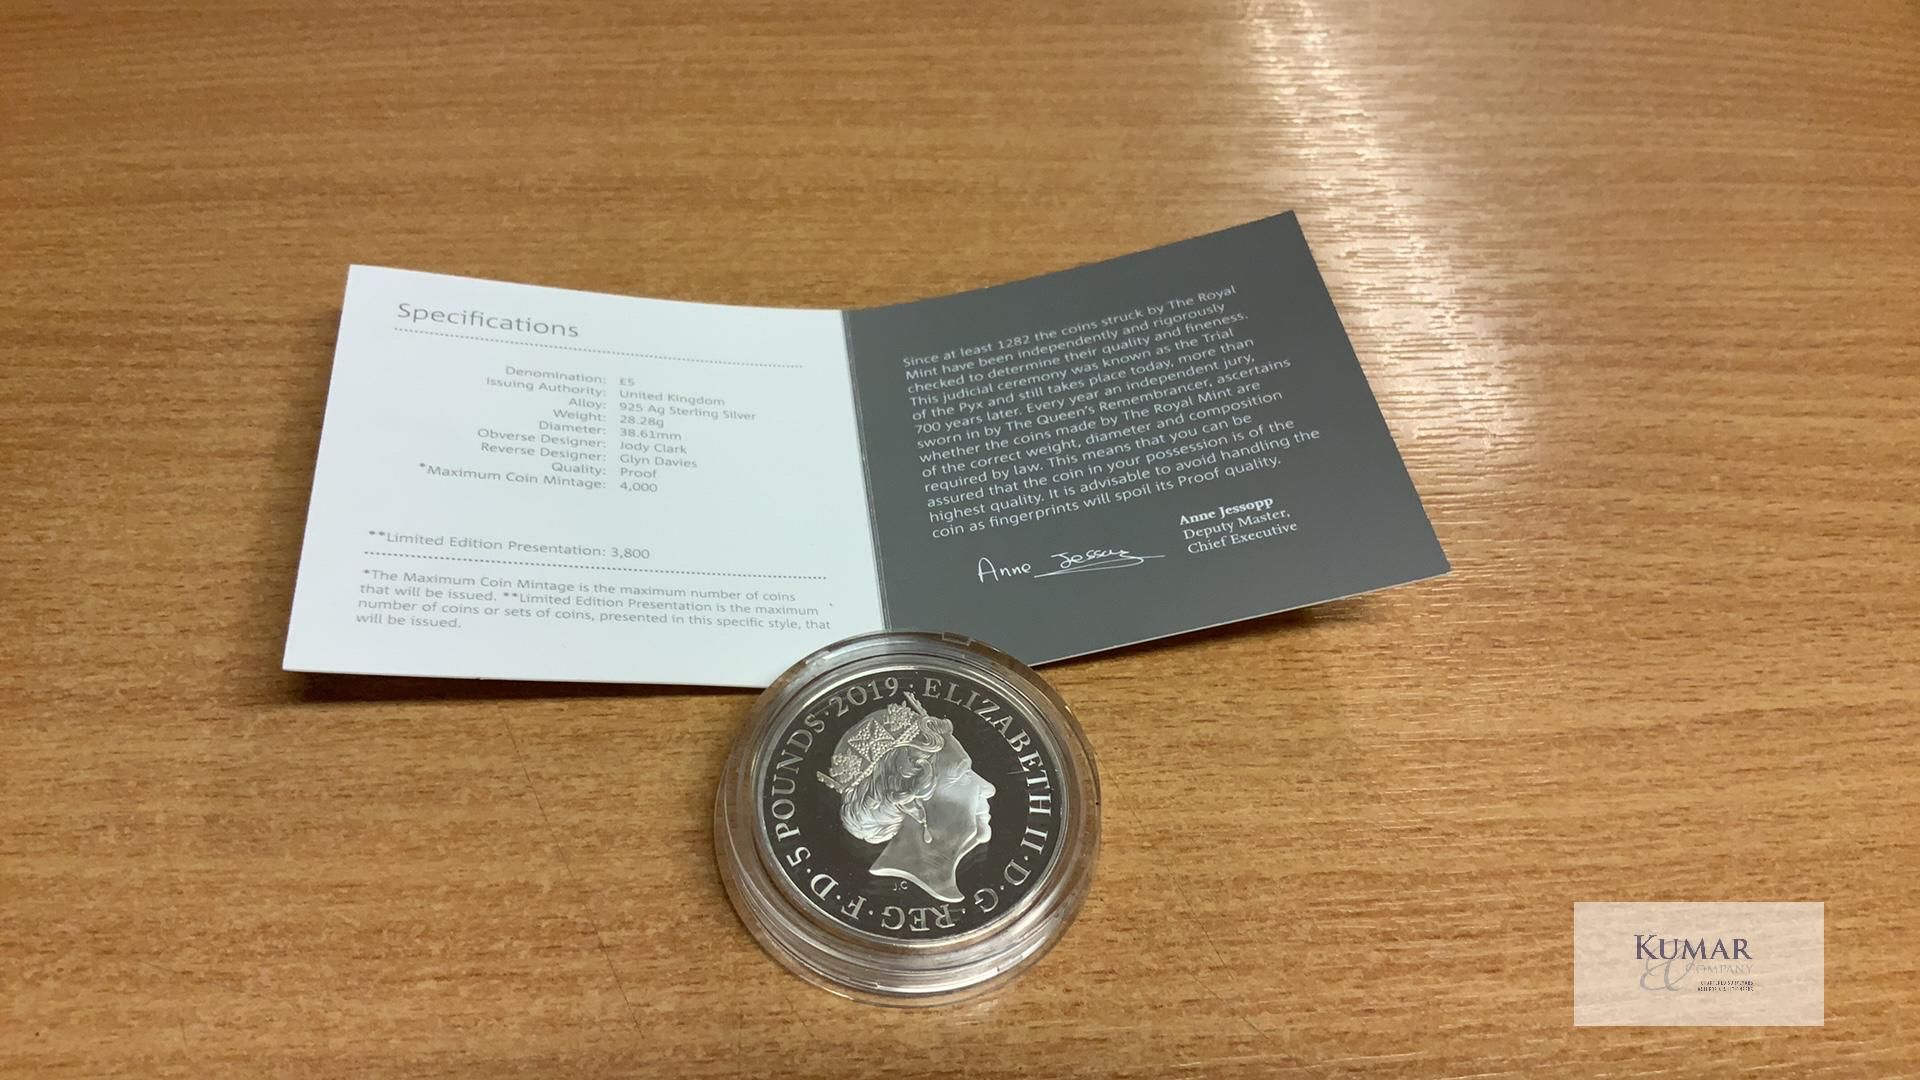 The Royal Mint Collection - The Tower of London Coin. The Crown Jewels 2020 UK £5 Silver Proof Coin. - Image 4 of 4